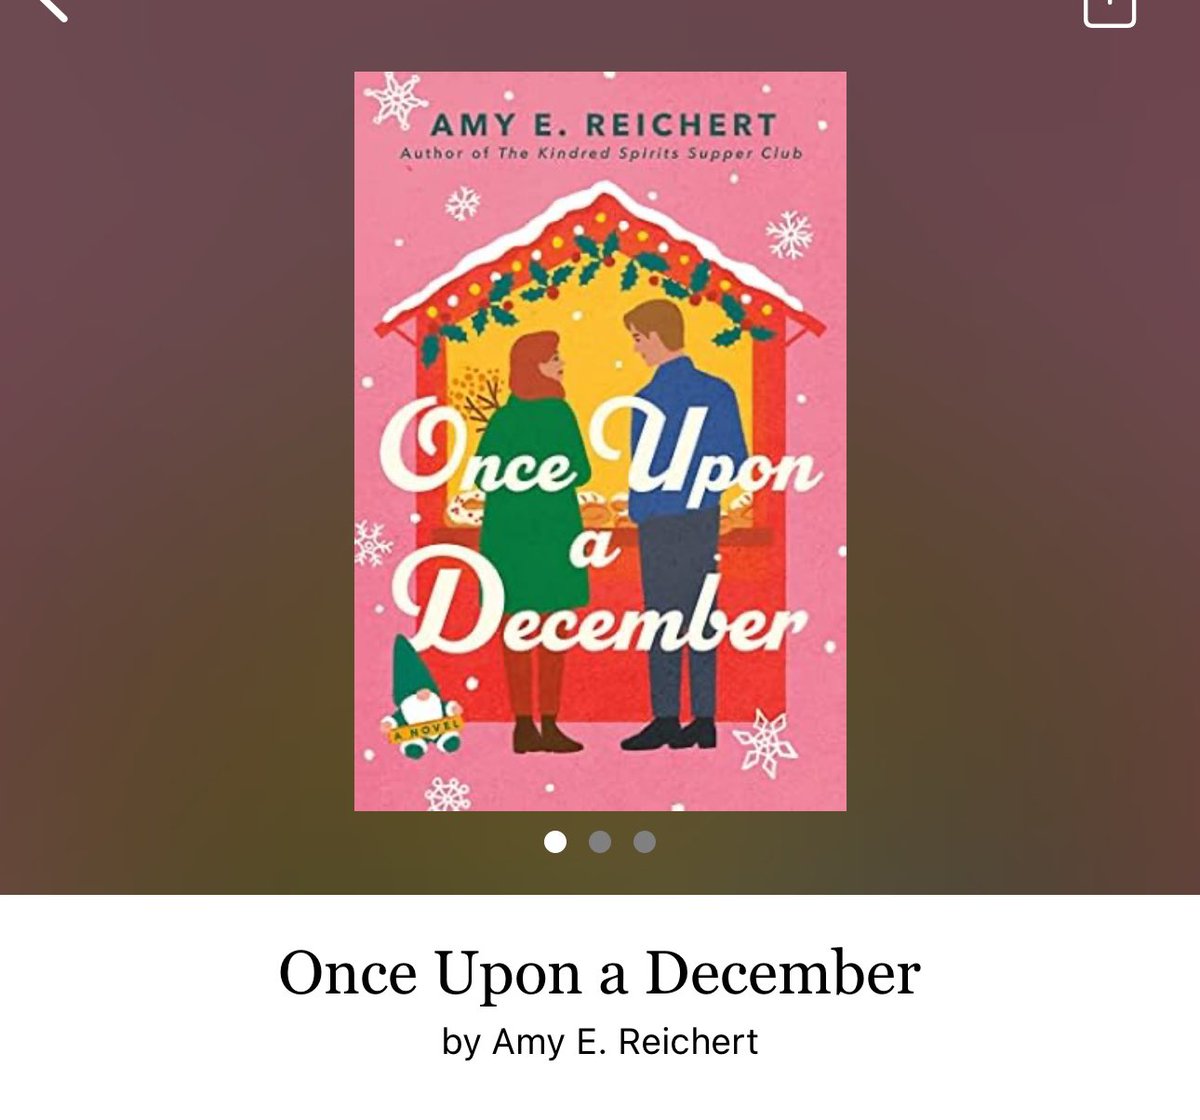 Once Upon A December by Amy E Reichert 

#OnceUponADecember  by #AmyEReichert #5650 #35chapters #335pages #1193of400 #seasonsReadings #Audiobook #47for12 #10houraudiobook #November2023 #clearingoffreadingshelves #whatsnext #readitquick